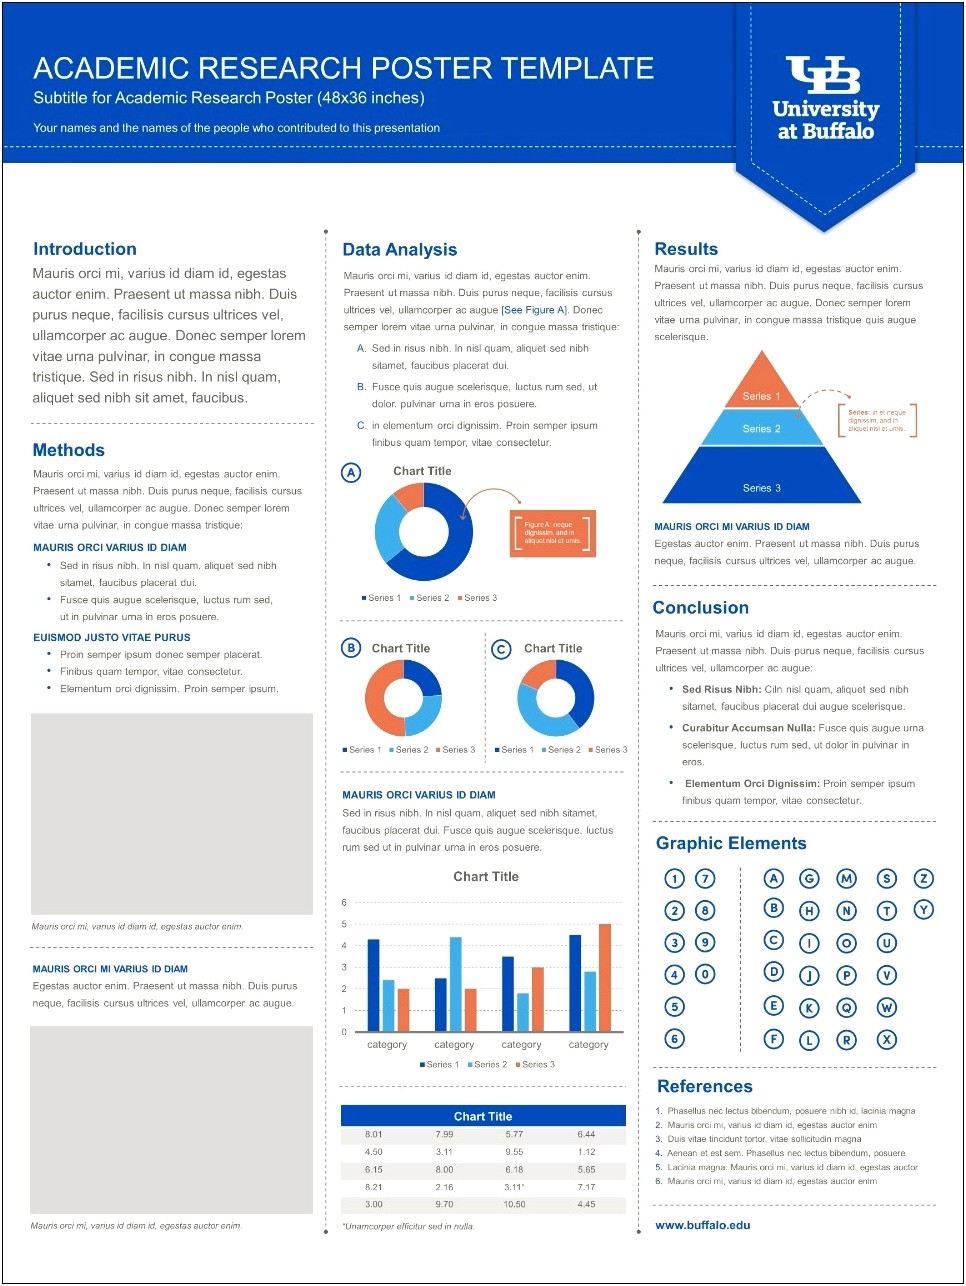 Poster Presentation Template 48x36 Free Download